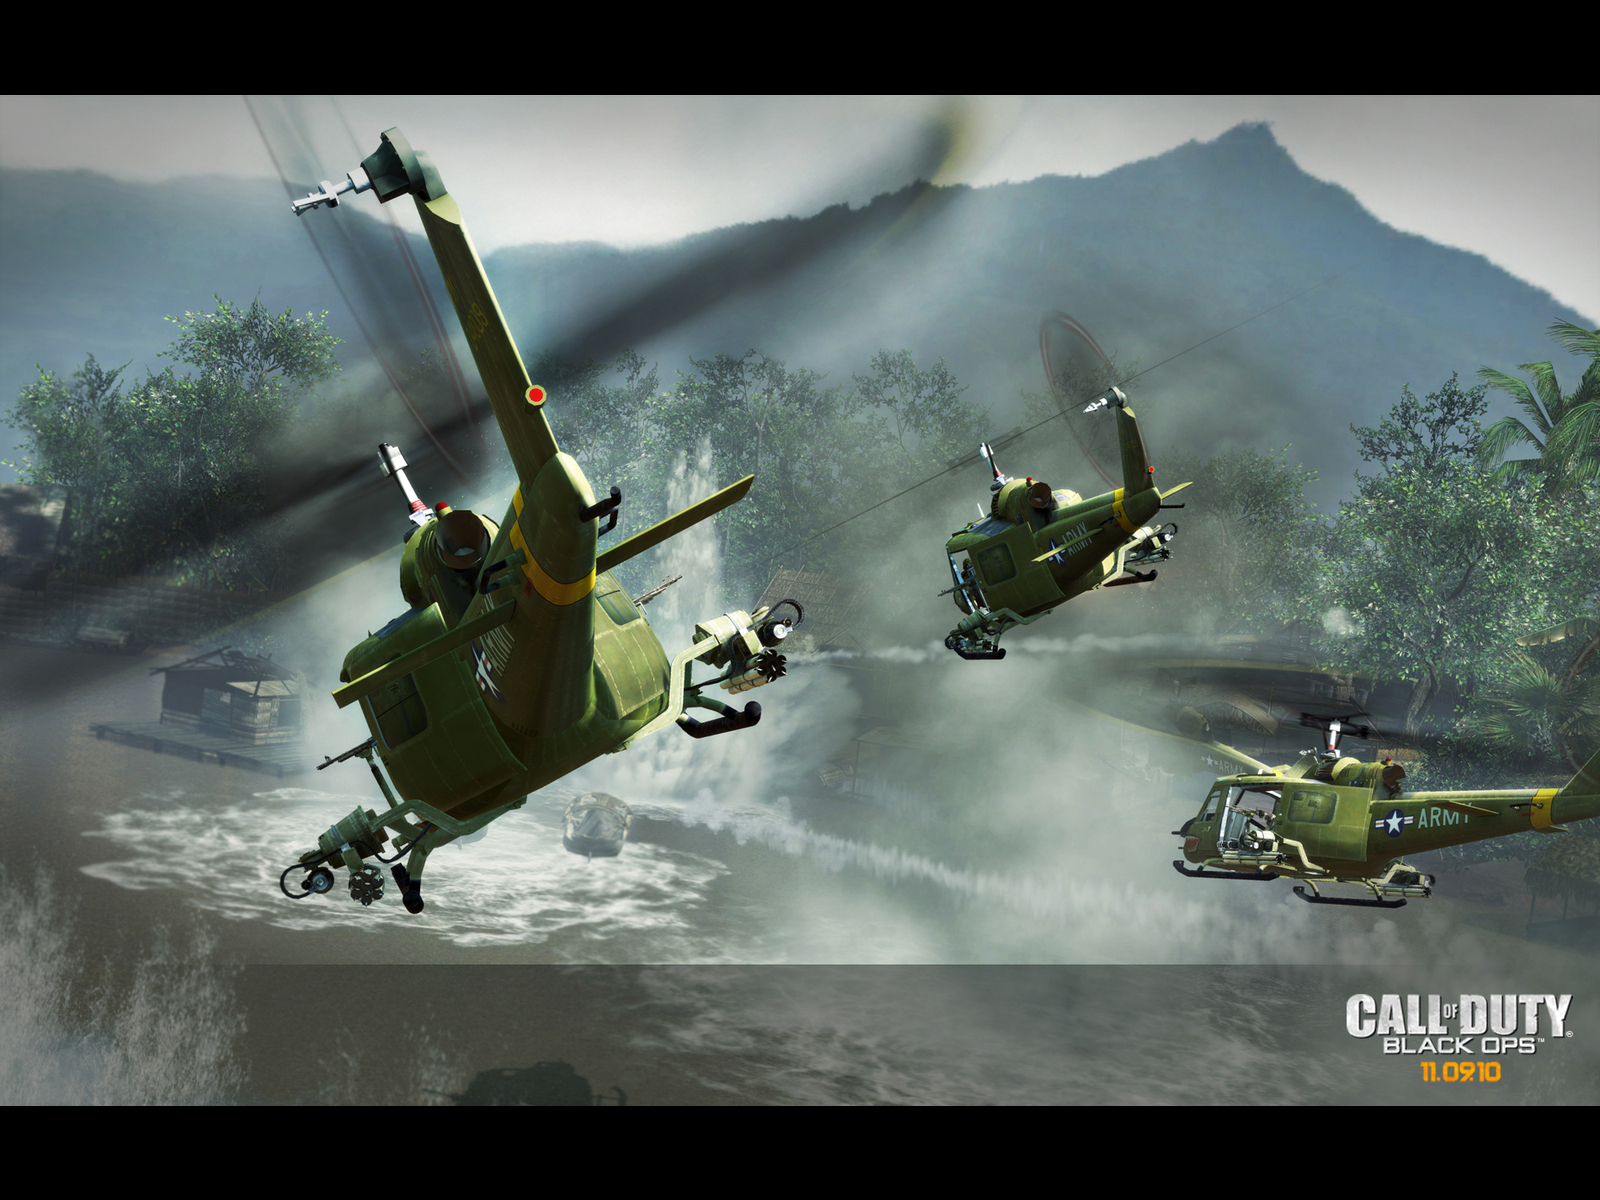 Huey Helicopters Attack Call Of Duty Black Ops